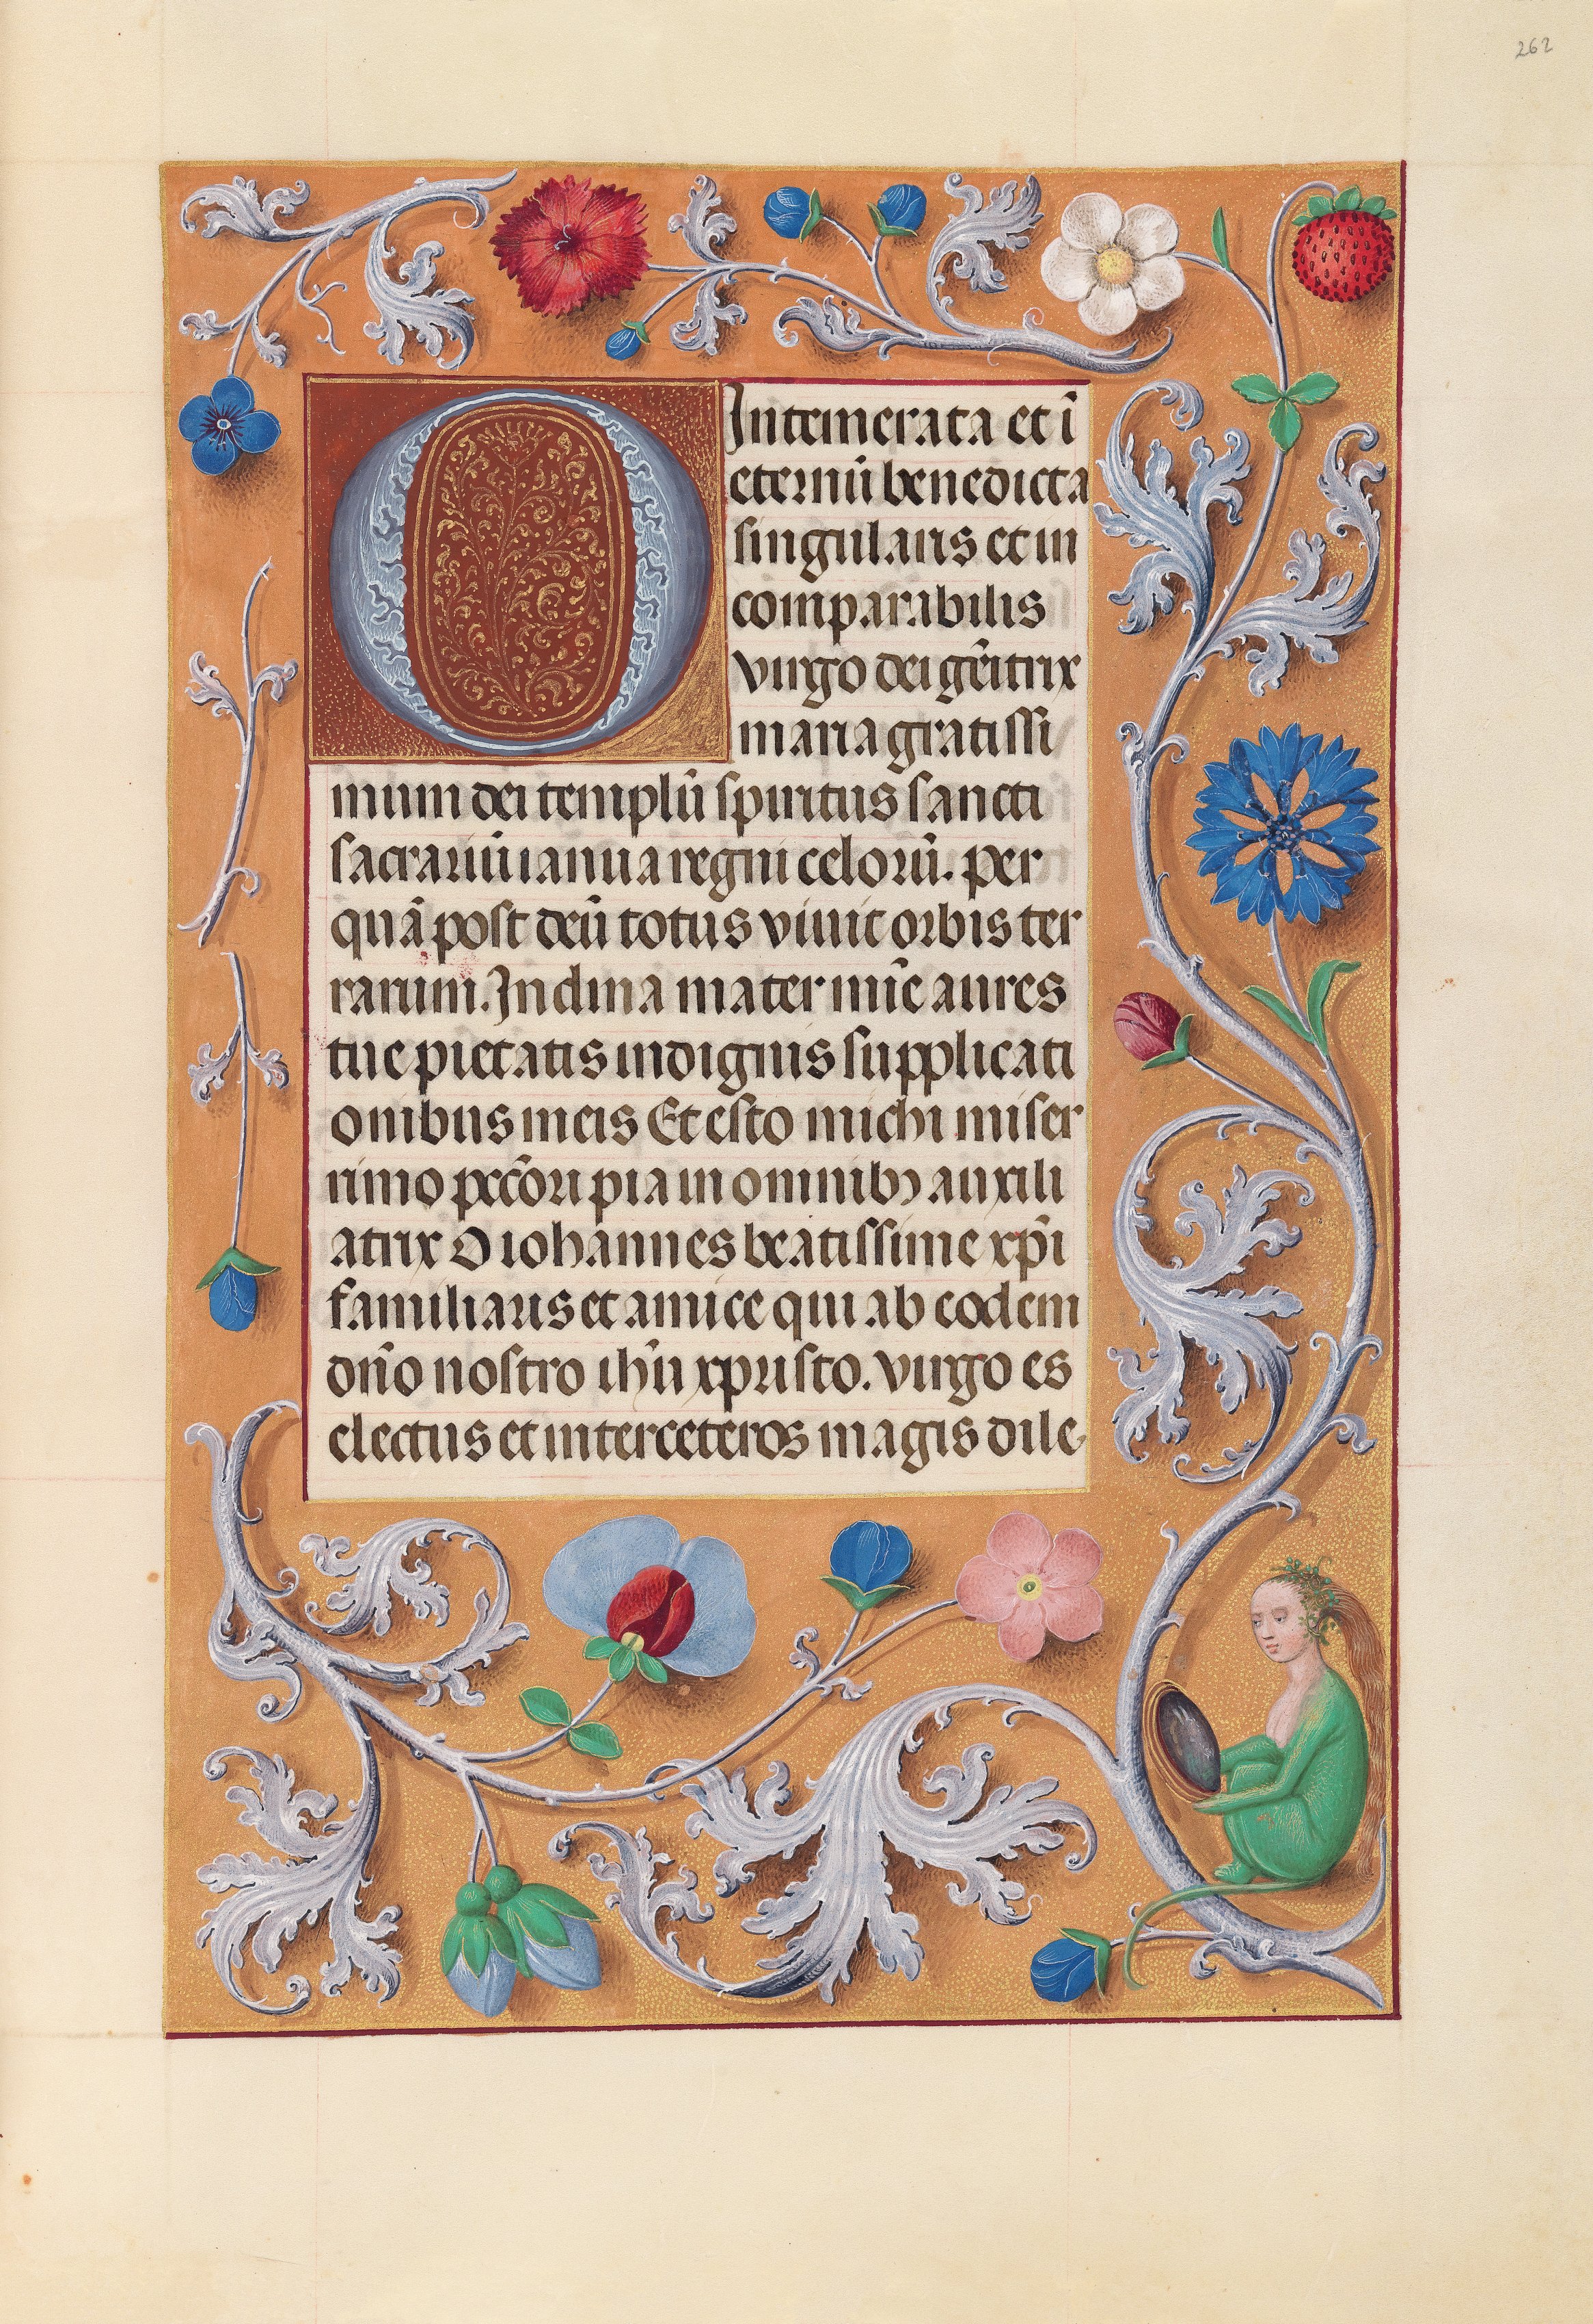 Hours of Queen Isabella the Catholic, Queen of Spain:  Fol. 262r